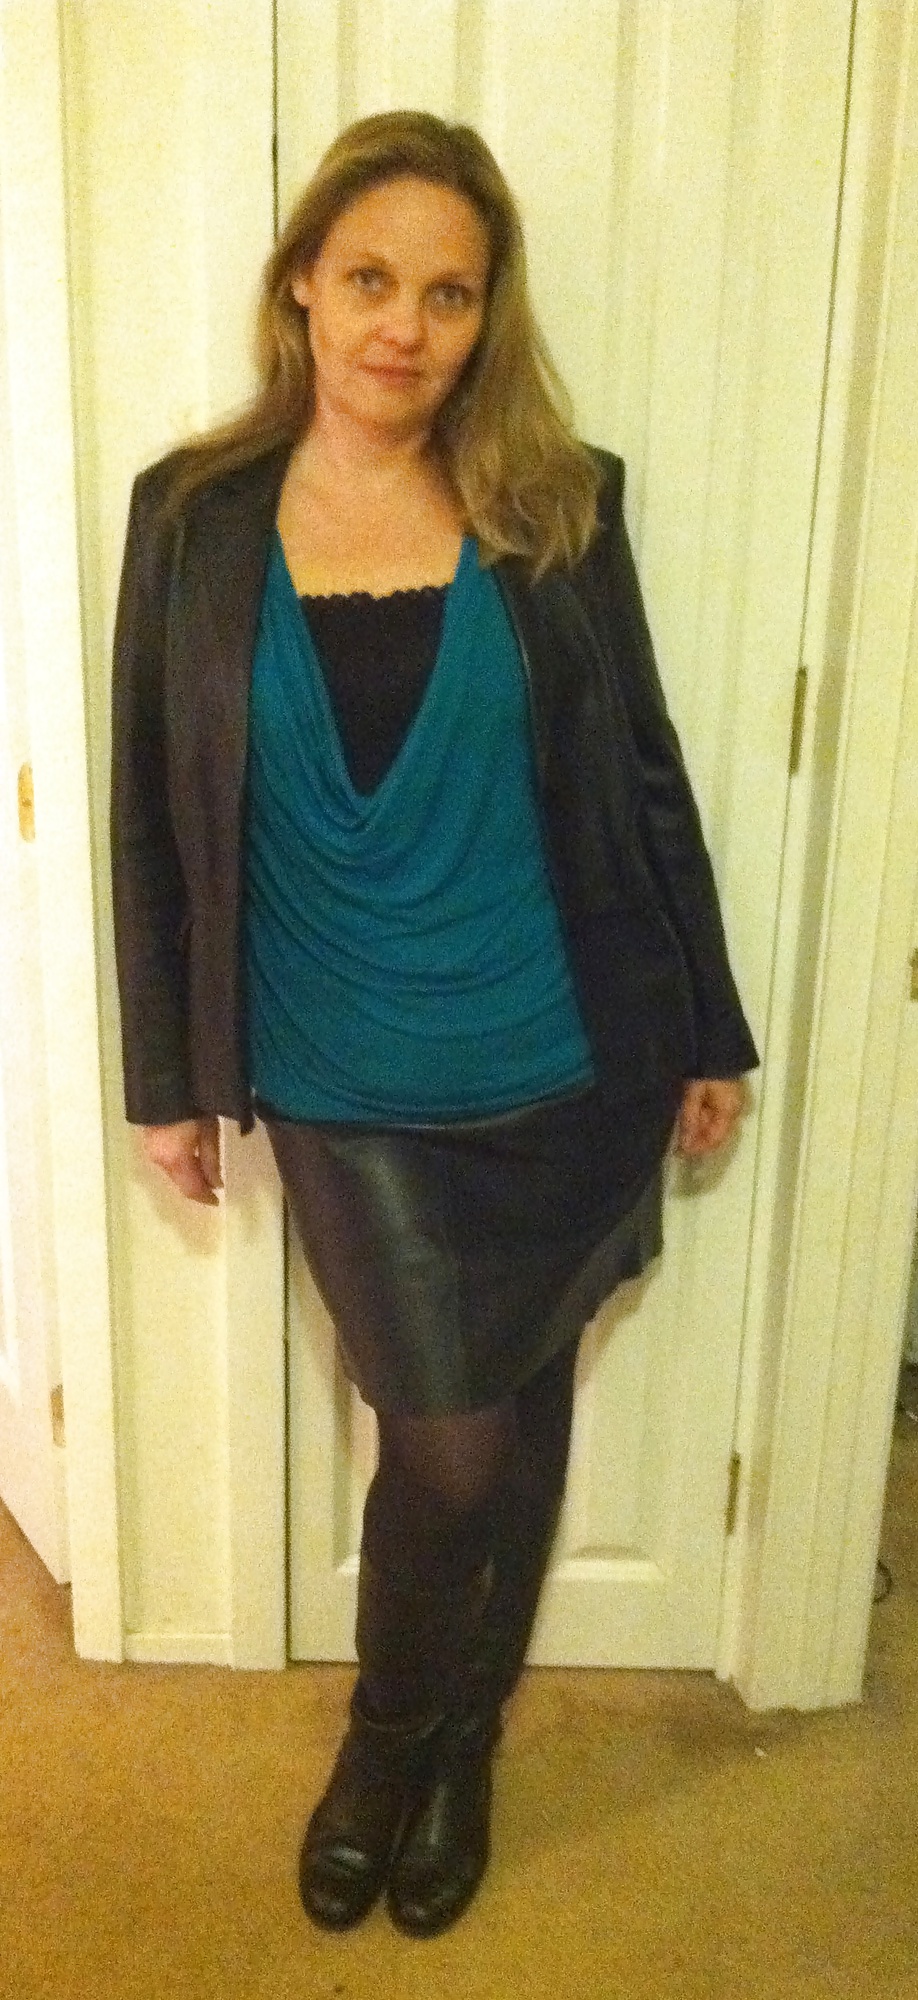 Cougar in Leather Skirt #34893145